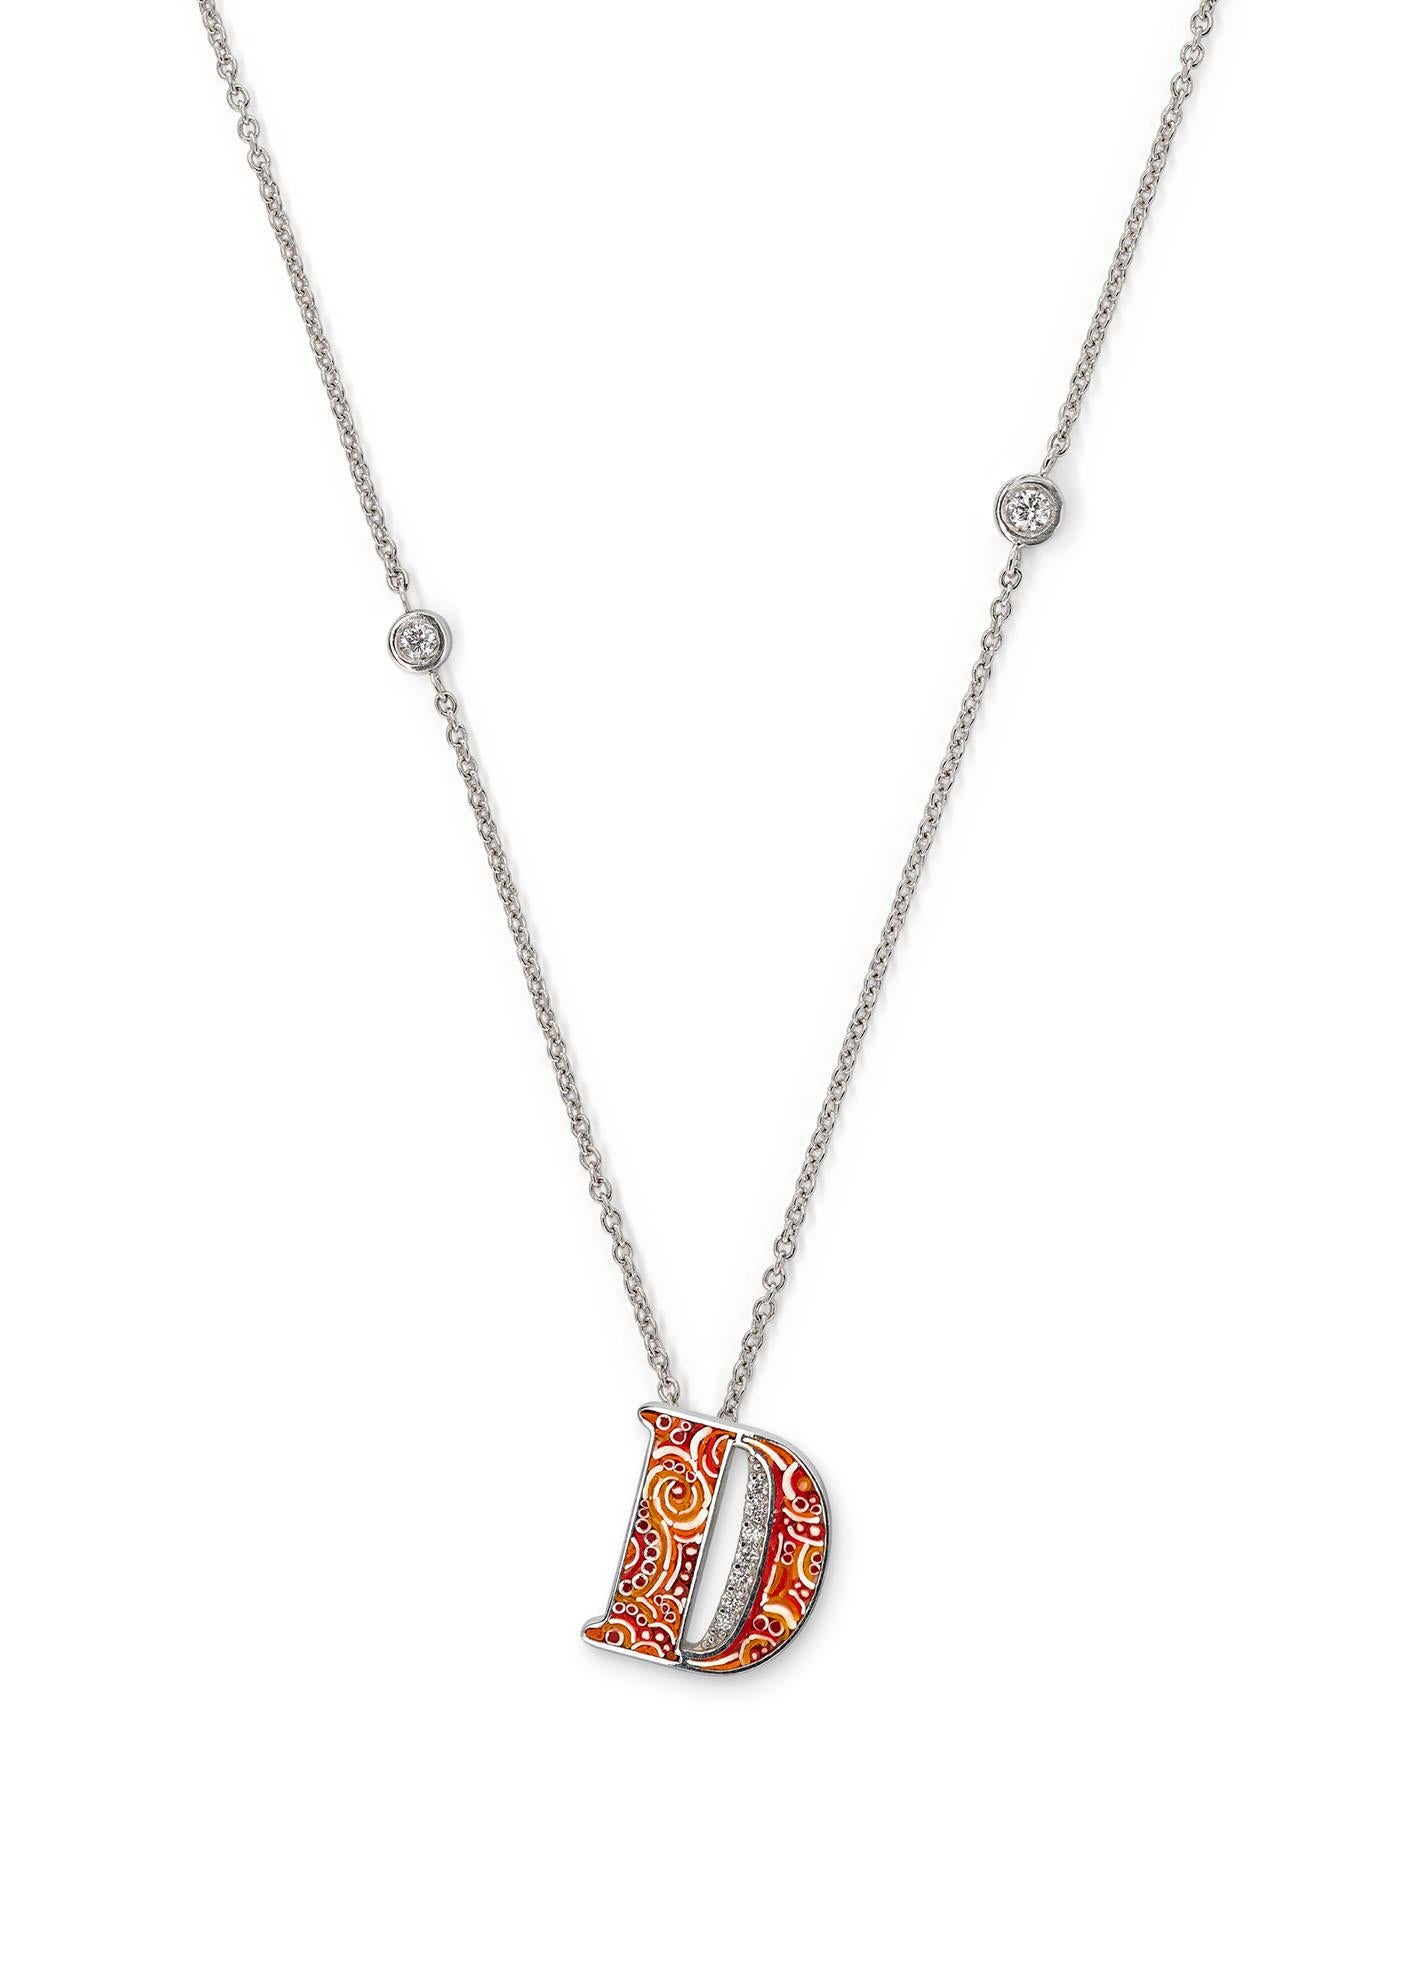 Contemporary Necklace Letter D White Gold White Diamonds Hand Decorated with Micromosaic For Sale